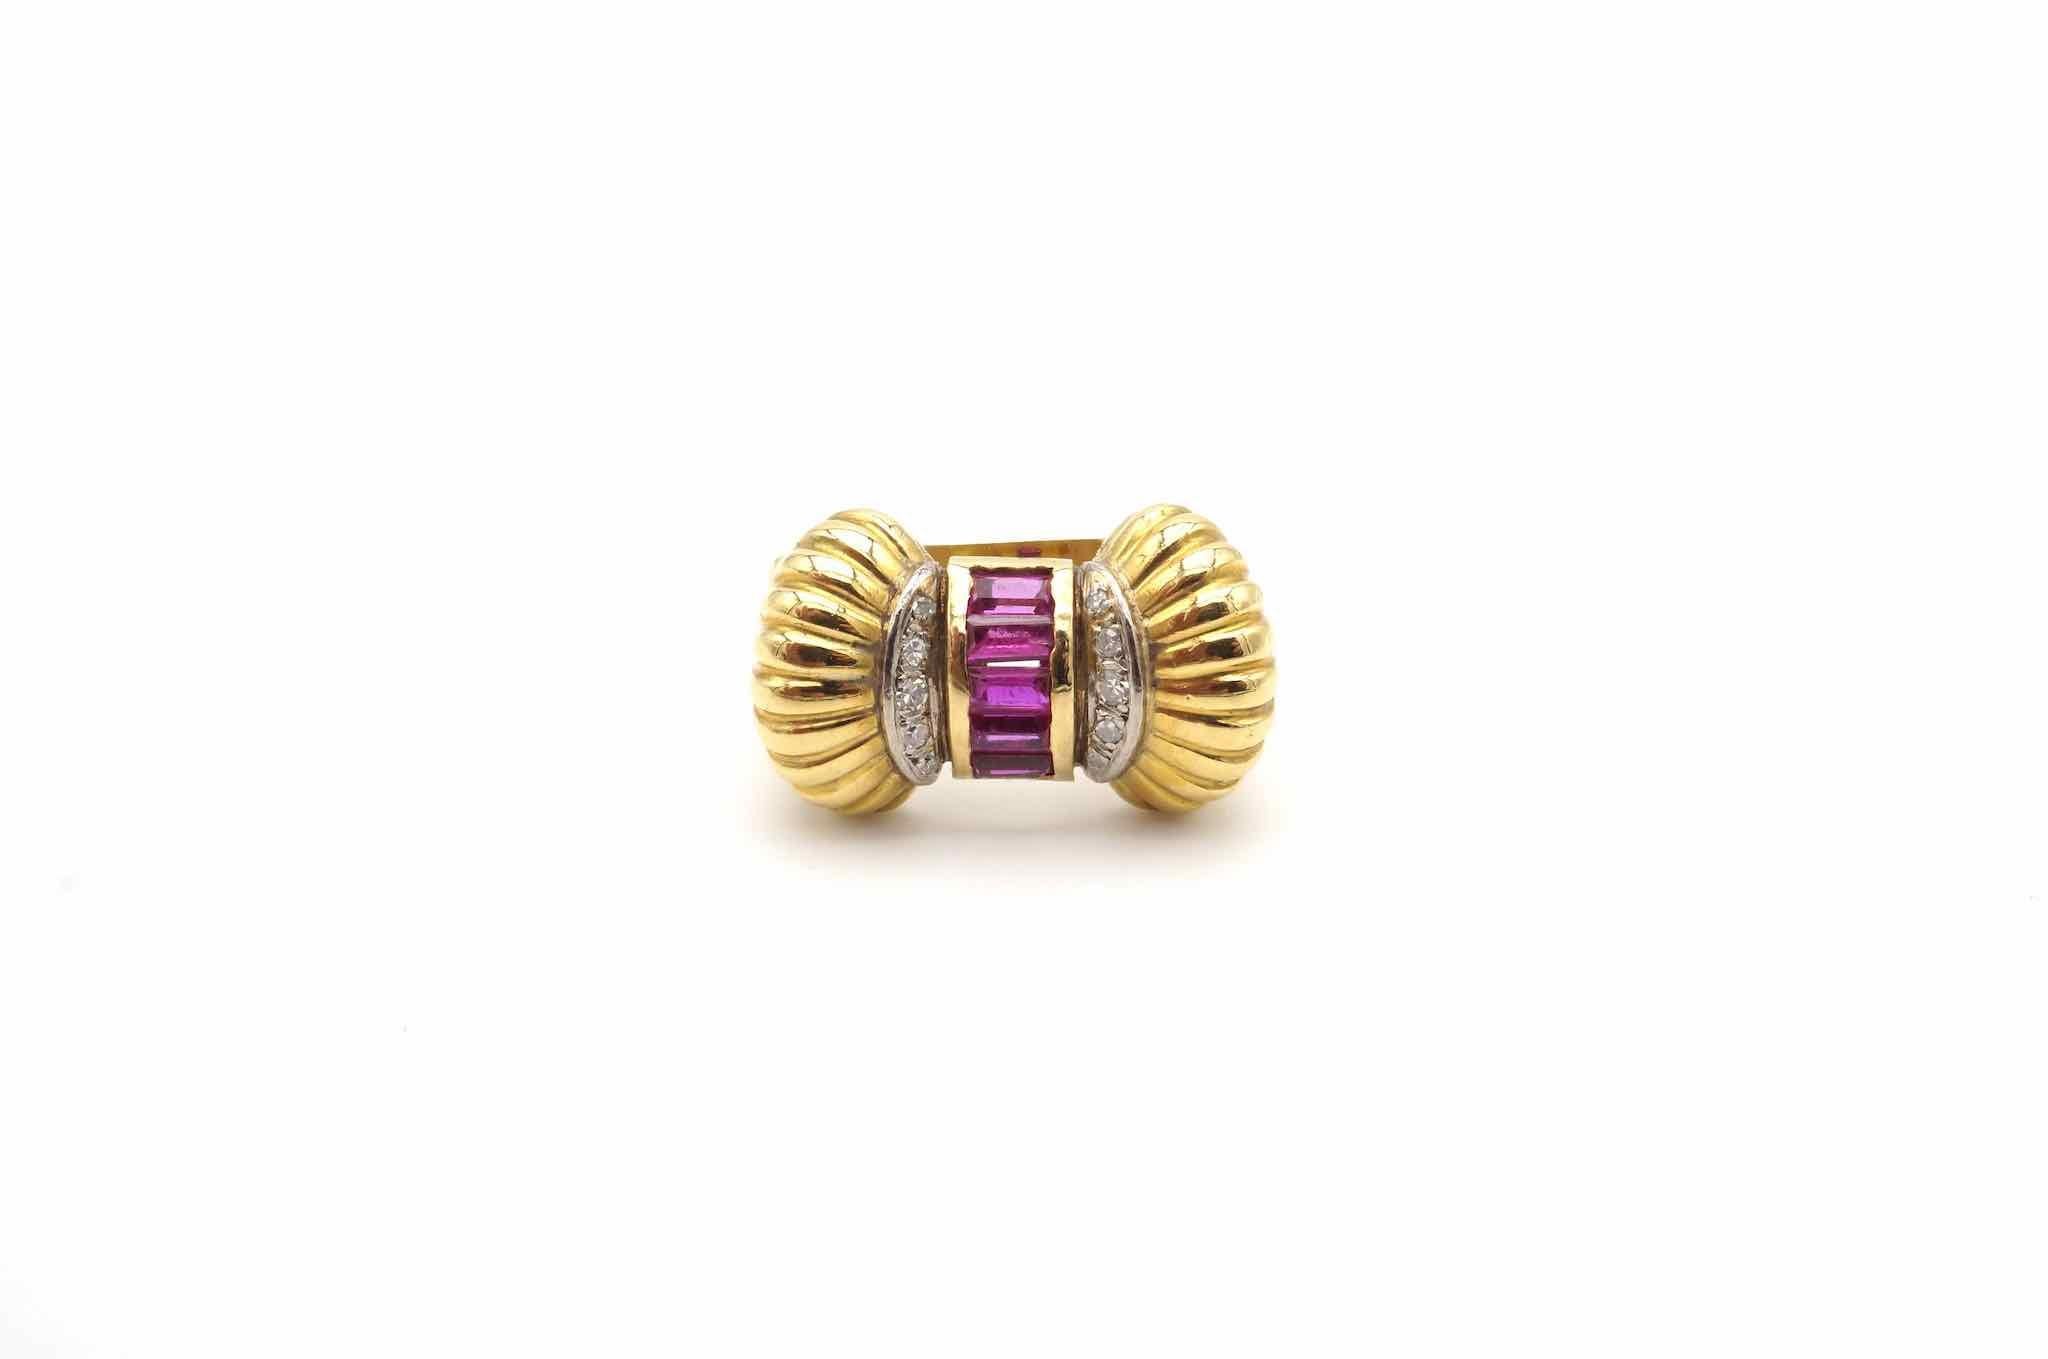 Stones: Calibrated rubies and diamonds
Material: 18k yellow gold
Dimensions: Width 2.30 x 1.50 cm length
Period: 1940
Weight: 11.9g
Size: 57 (free sizing)
Certificate
Ref. : 24717